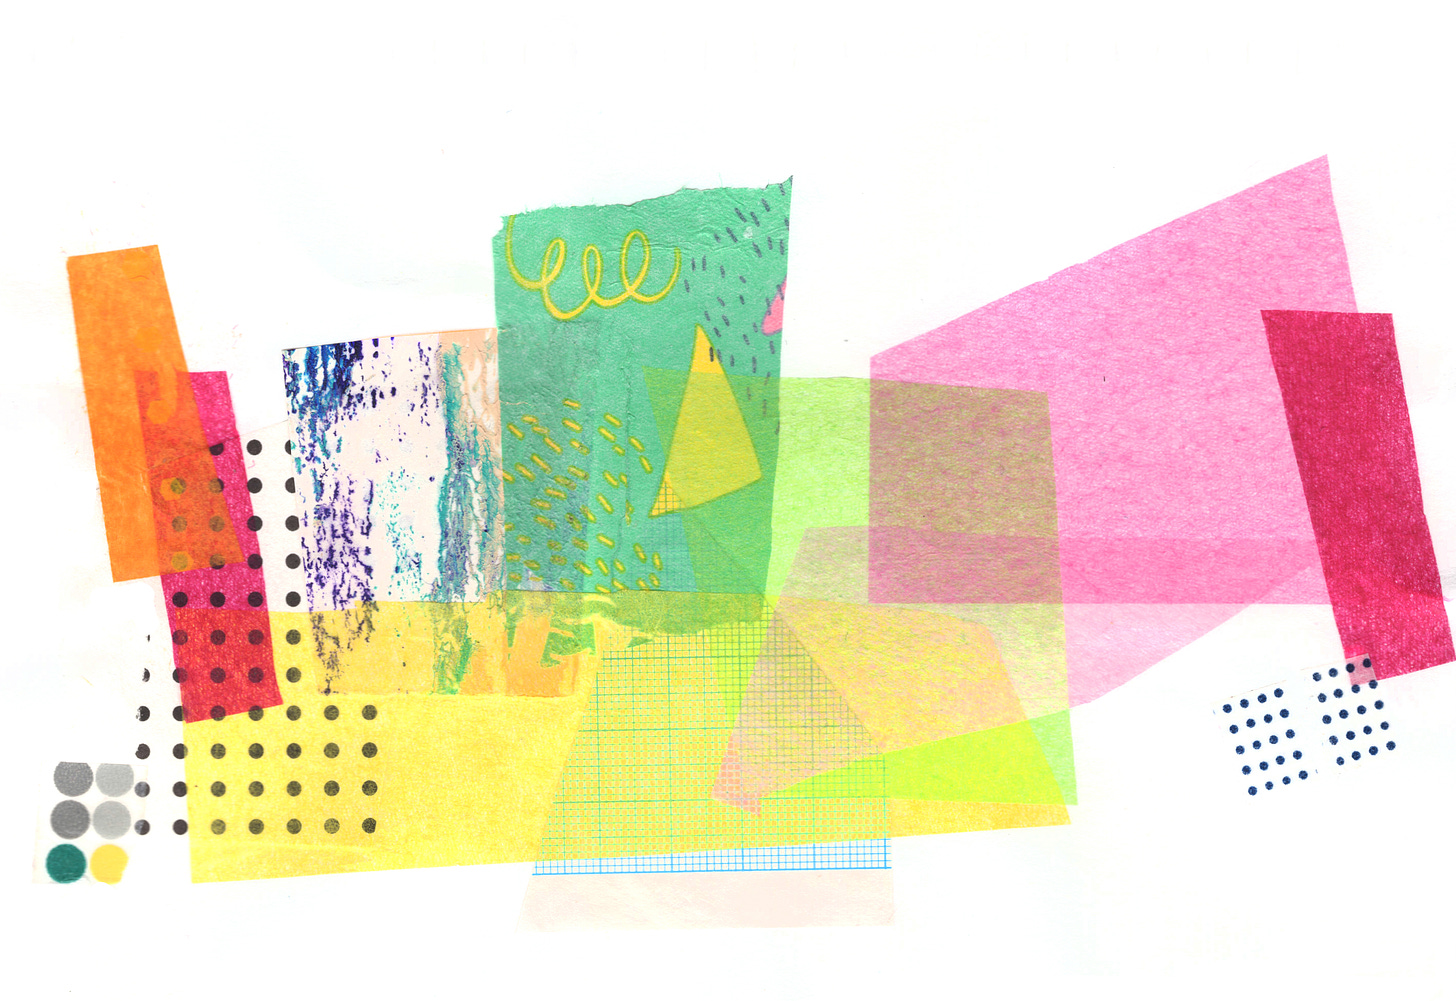 Pink, green, yellow, and orange papers spashed across a white background with black dotted accents. Digital collage.